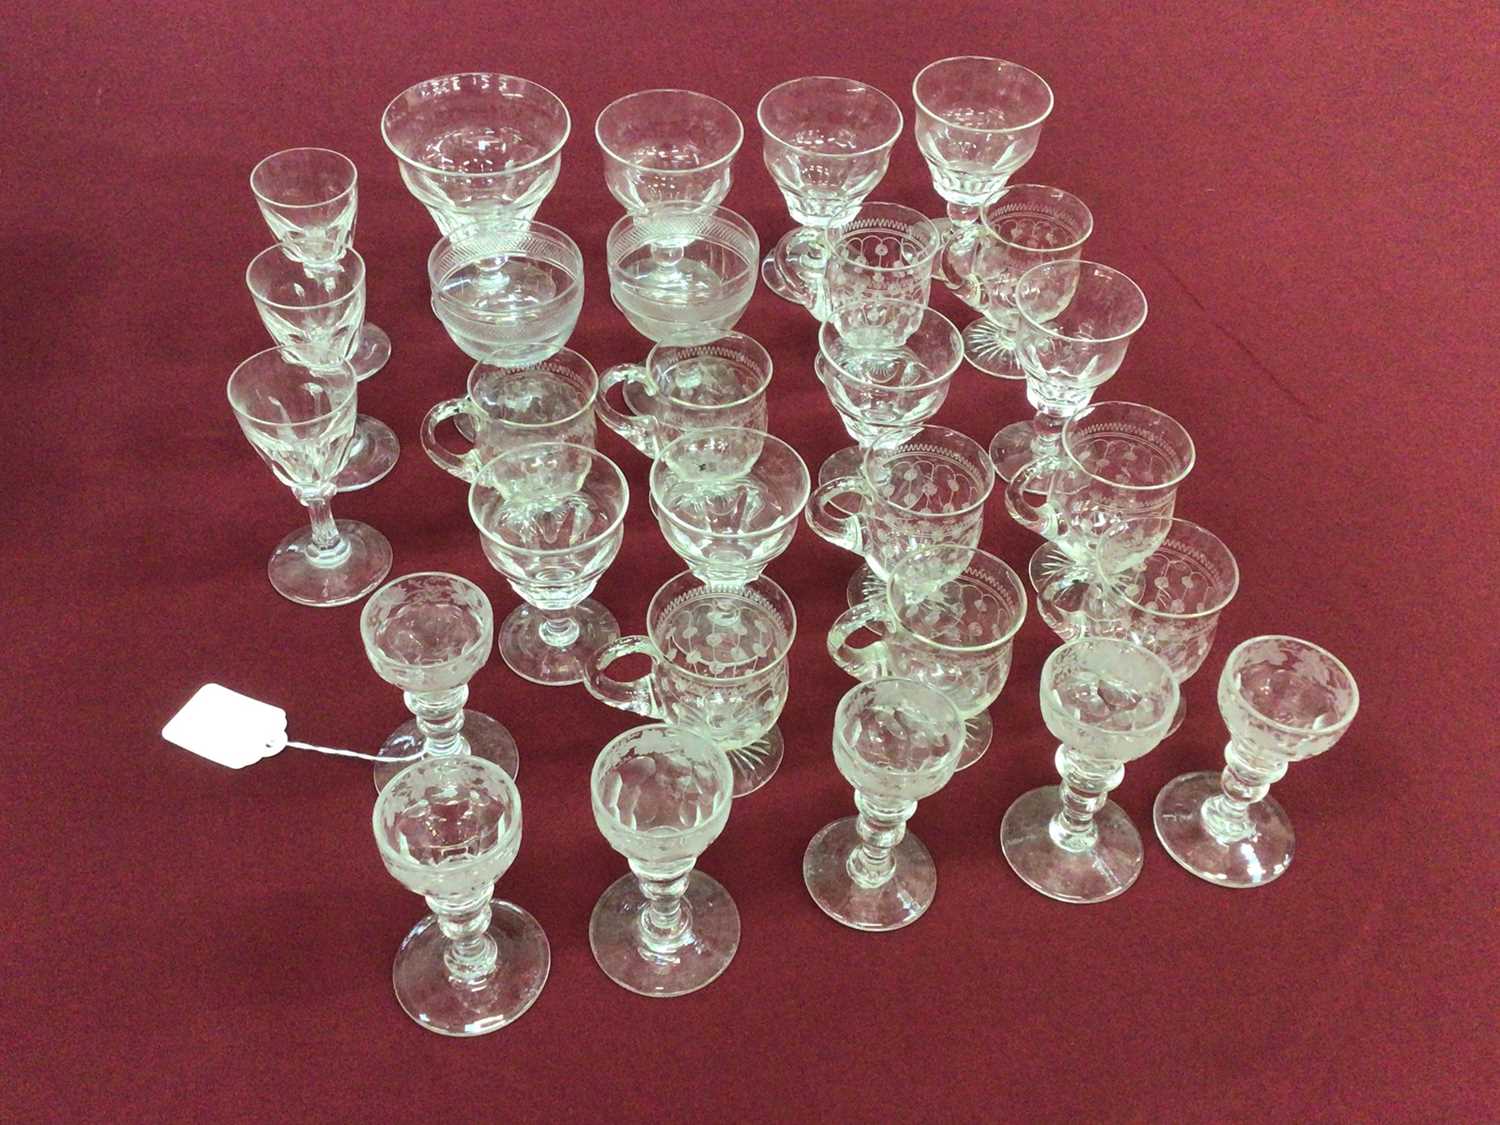 Lot 40 - A group of Victorian and later glassware, including a set of nine Edwardian etched custard cups, a set of six Victorian vine-etched sherry glasses, a pair of engraved coupes, a group of eight Stuar...